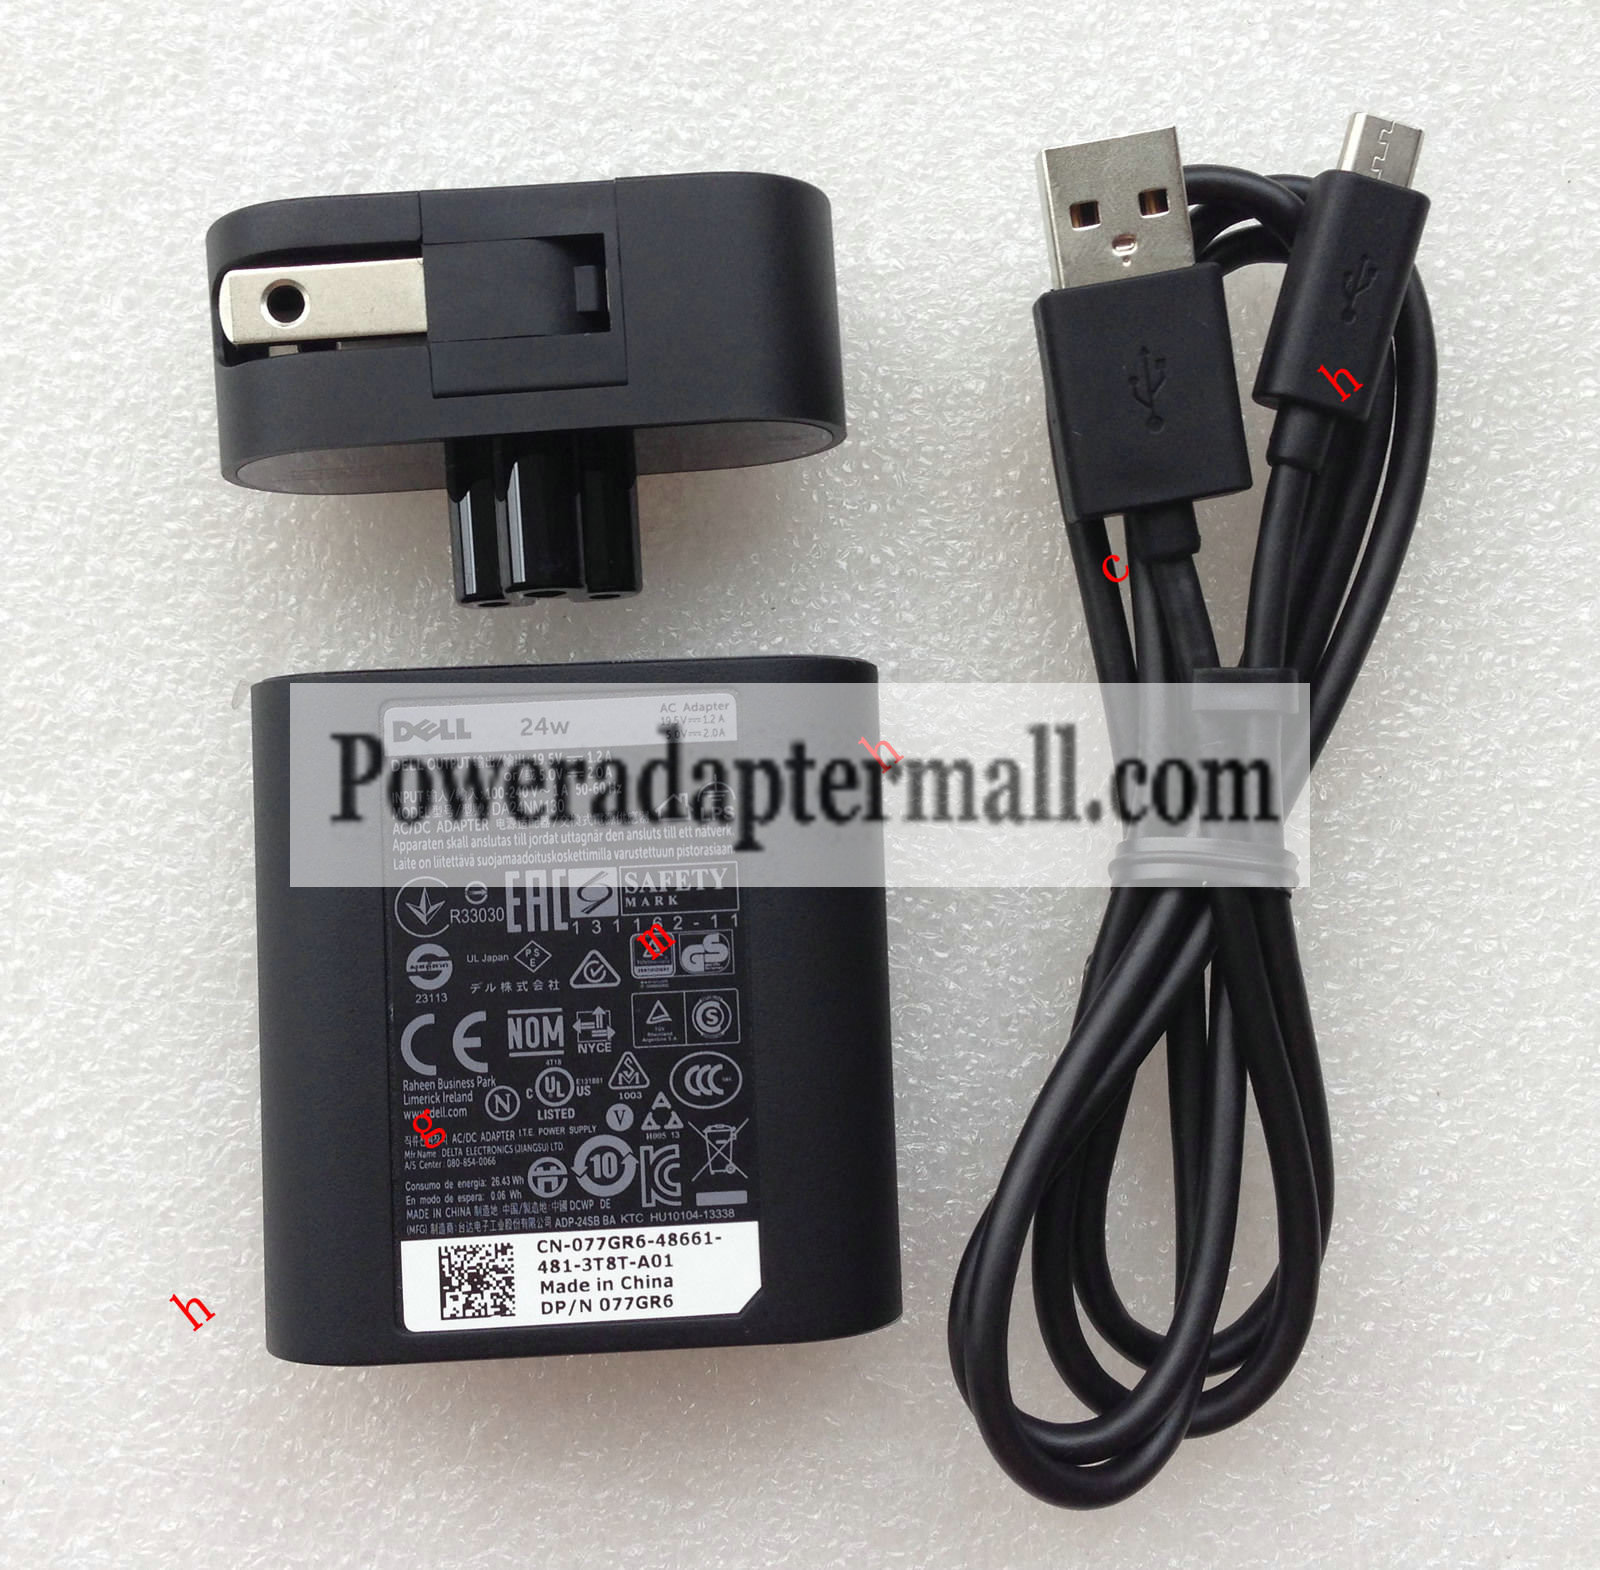 NEW Dell Venue 11 8 7 Pro Tablet AC Power Adapter Charger 77GR6